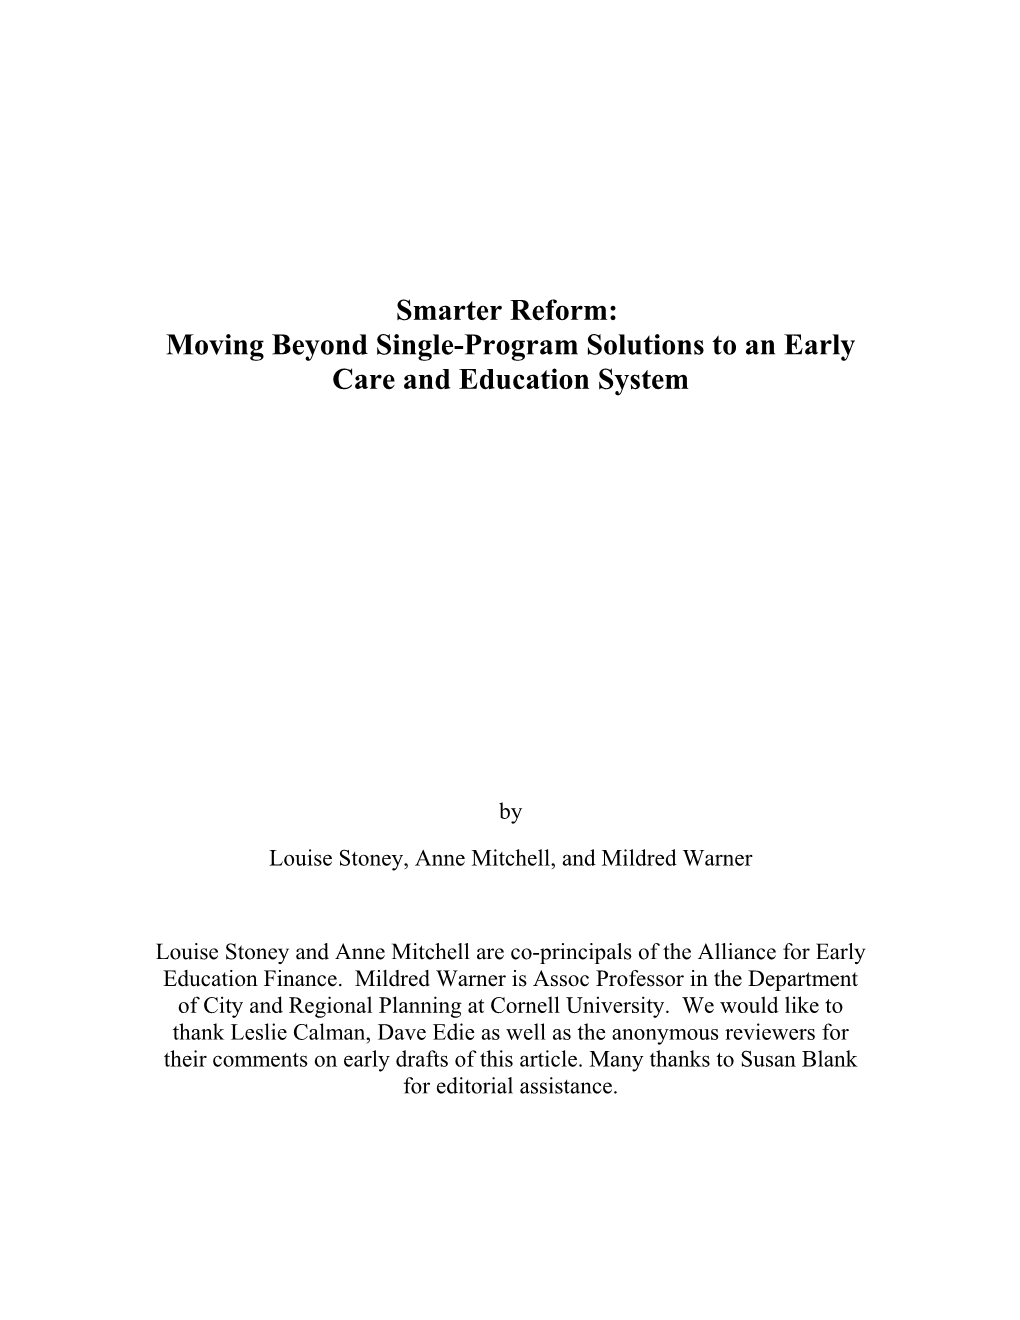 Rough Outline for a Paper on Receiving High Returns on Early Childhood Development